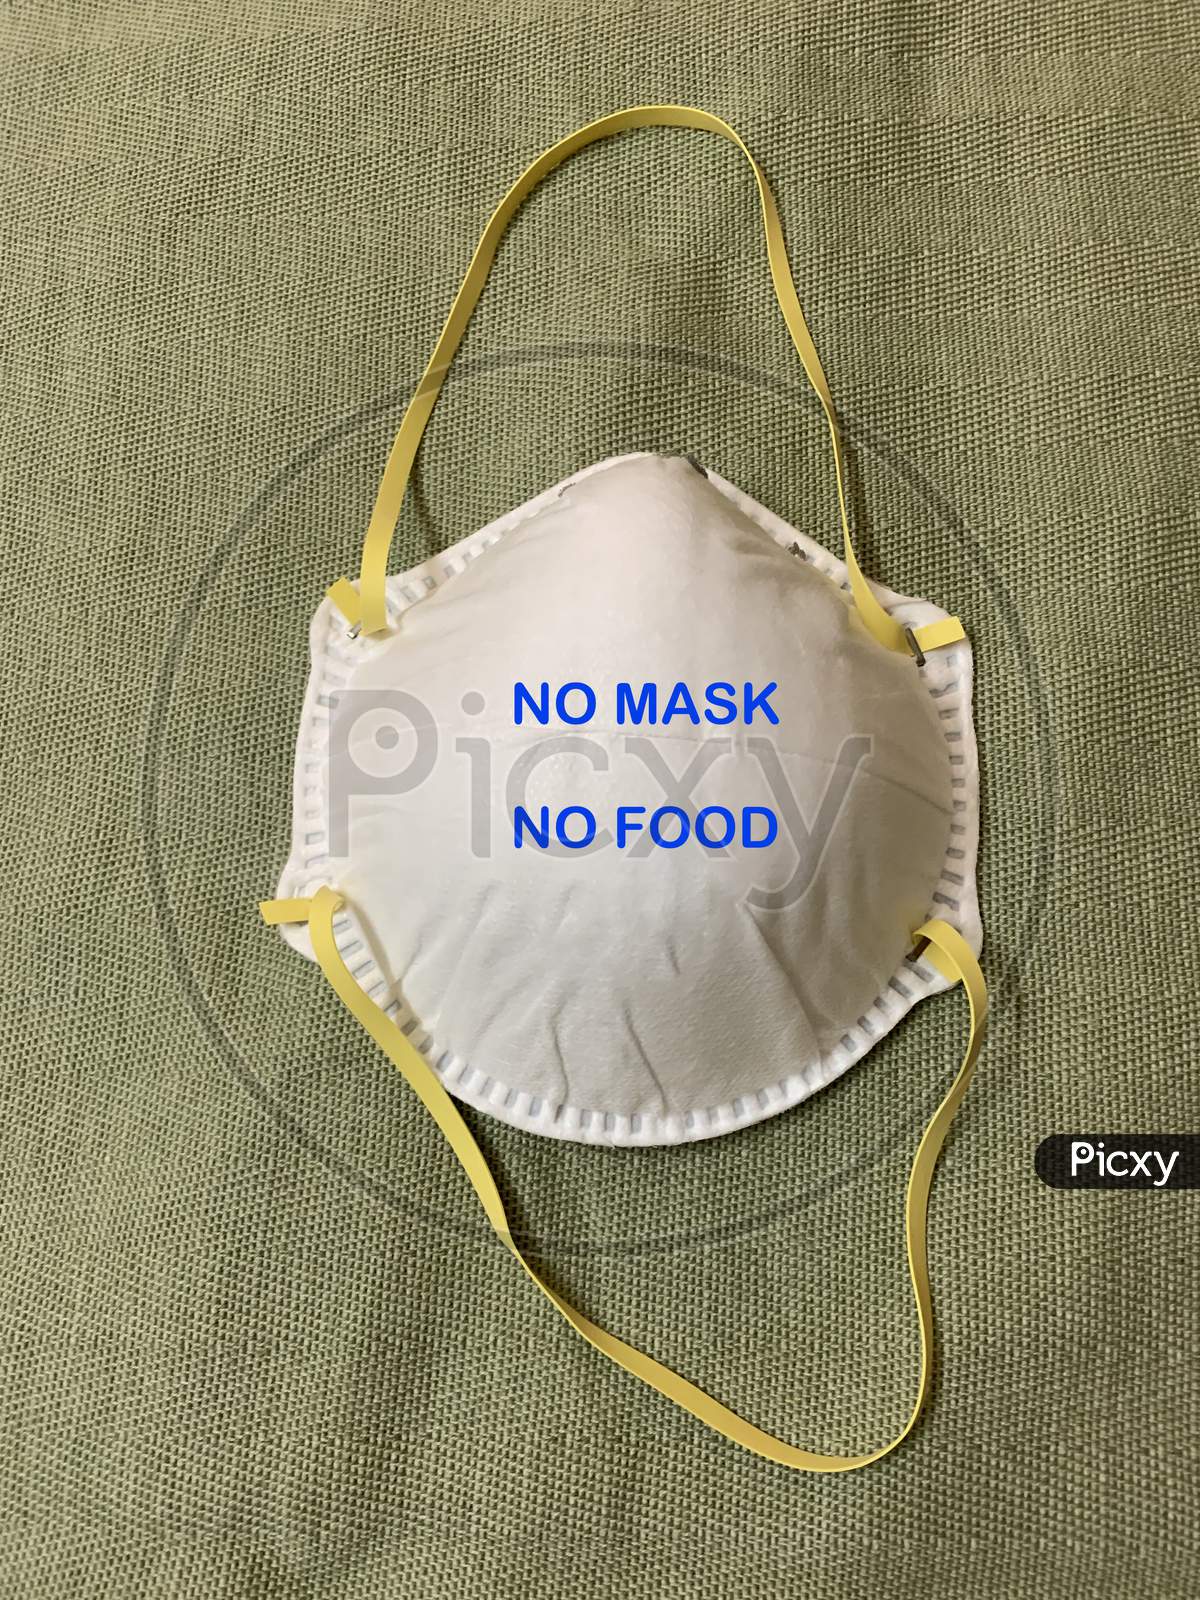 N 95 mask with a message of No mask No food